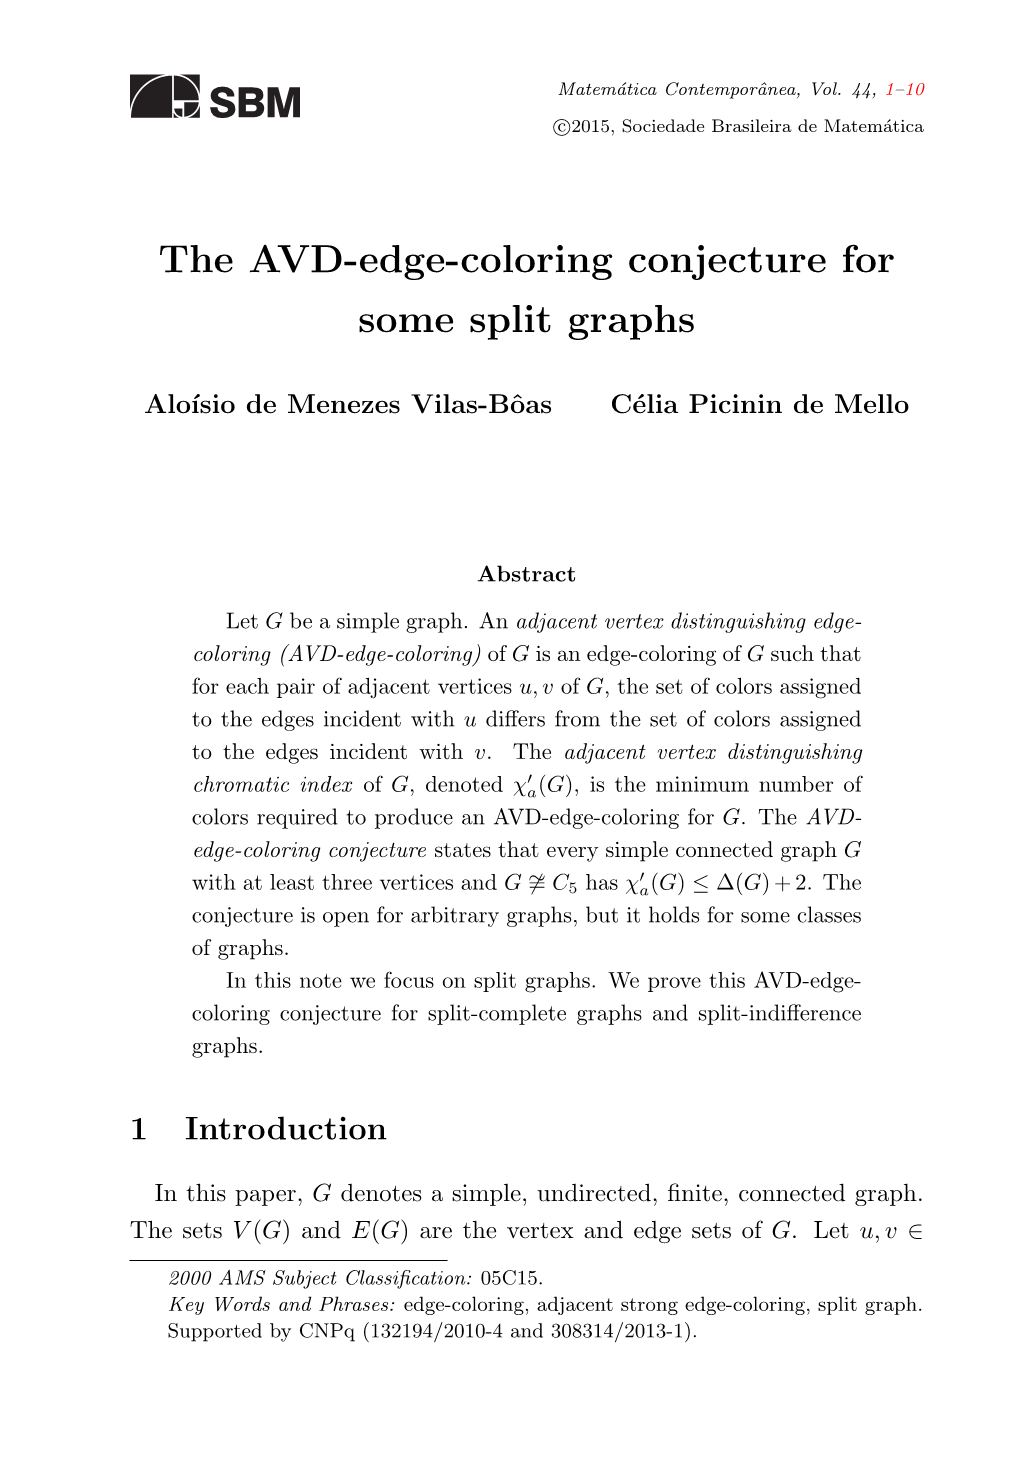 The AVD-Edge-Coloring Conjecture for Some Split Graphs